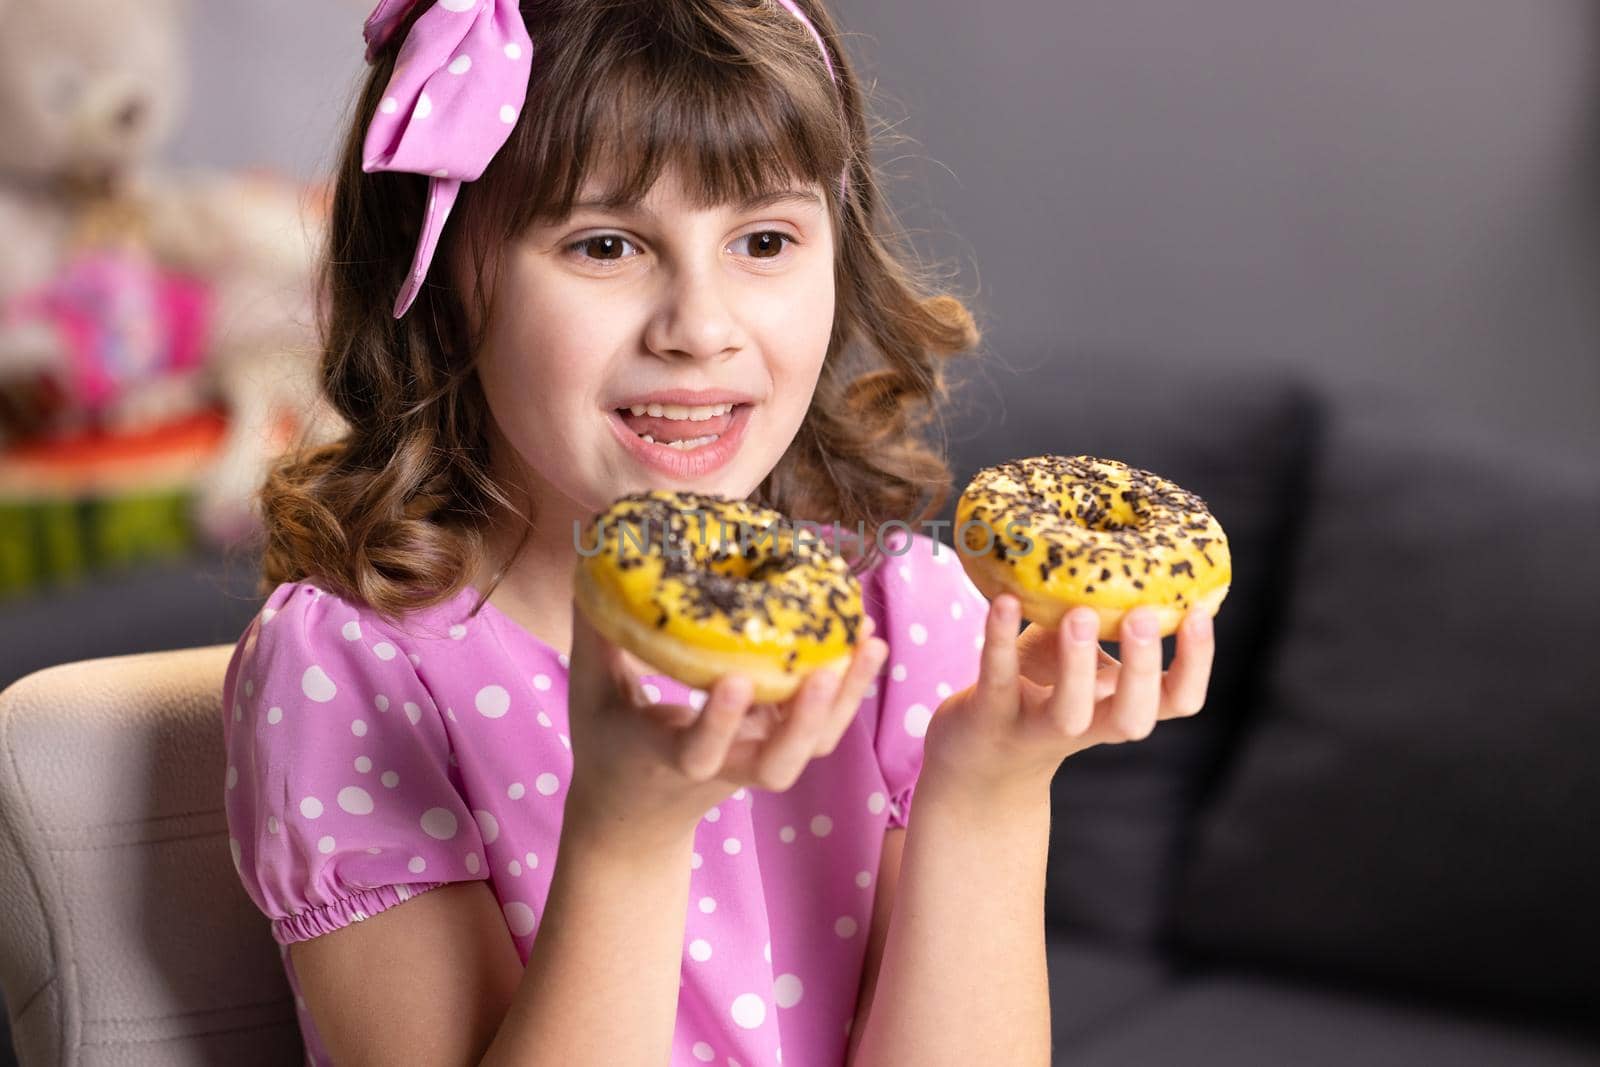 Cheerful school girl playing with cakes indoors. Funny teenager girl having fun with colorful donuts at modern home. Portrait of sweet girl choosing between two donuts in home room